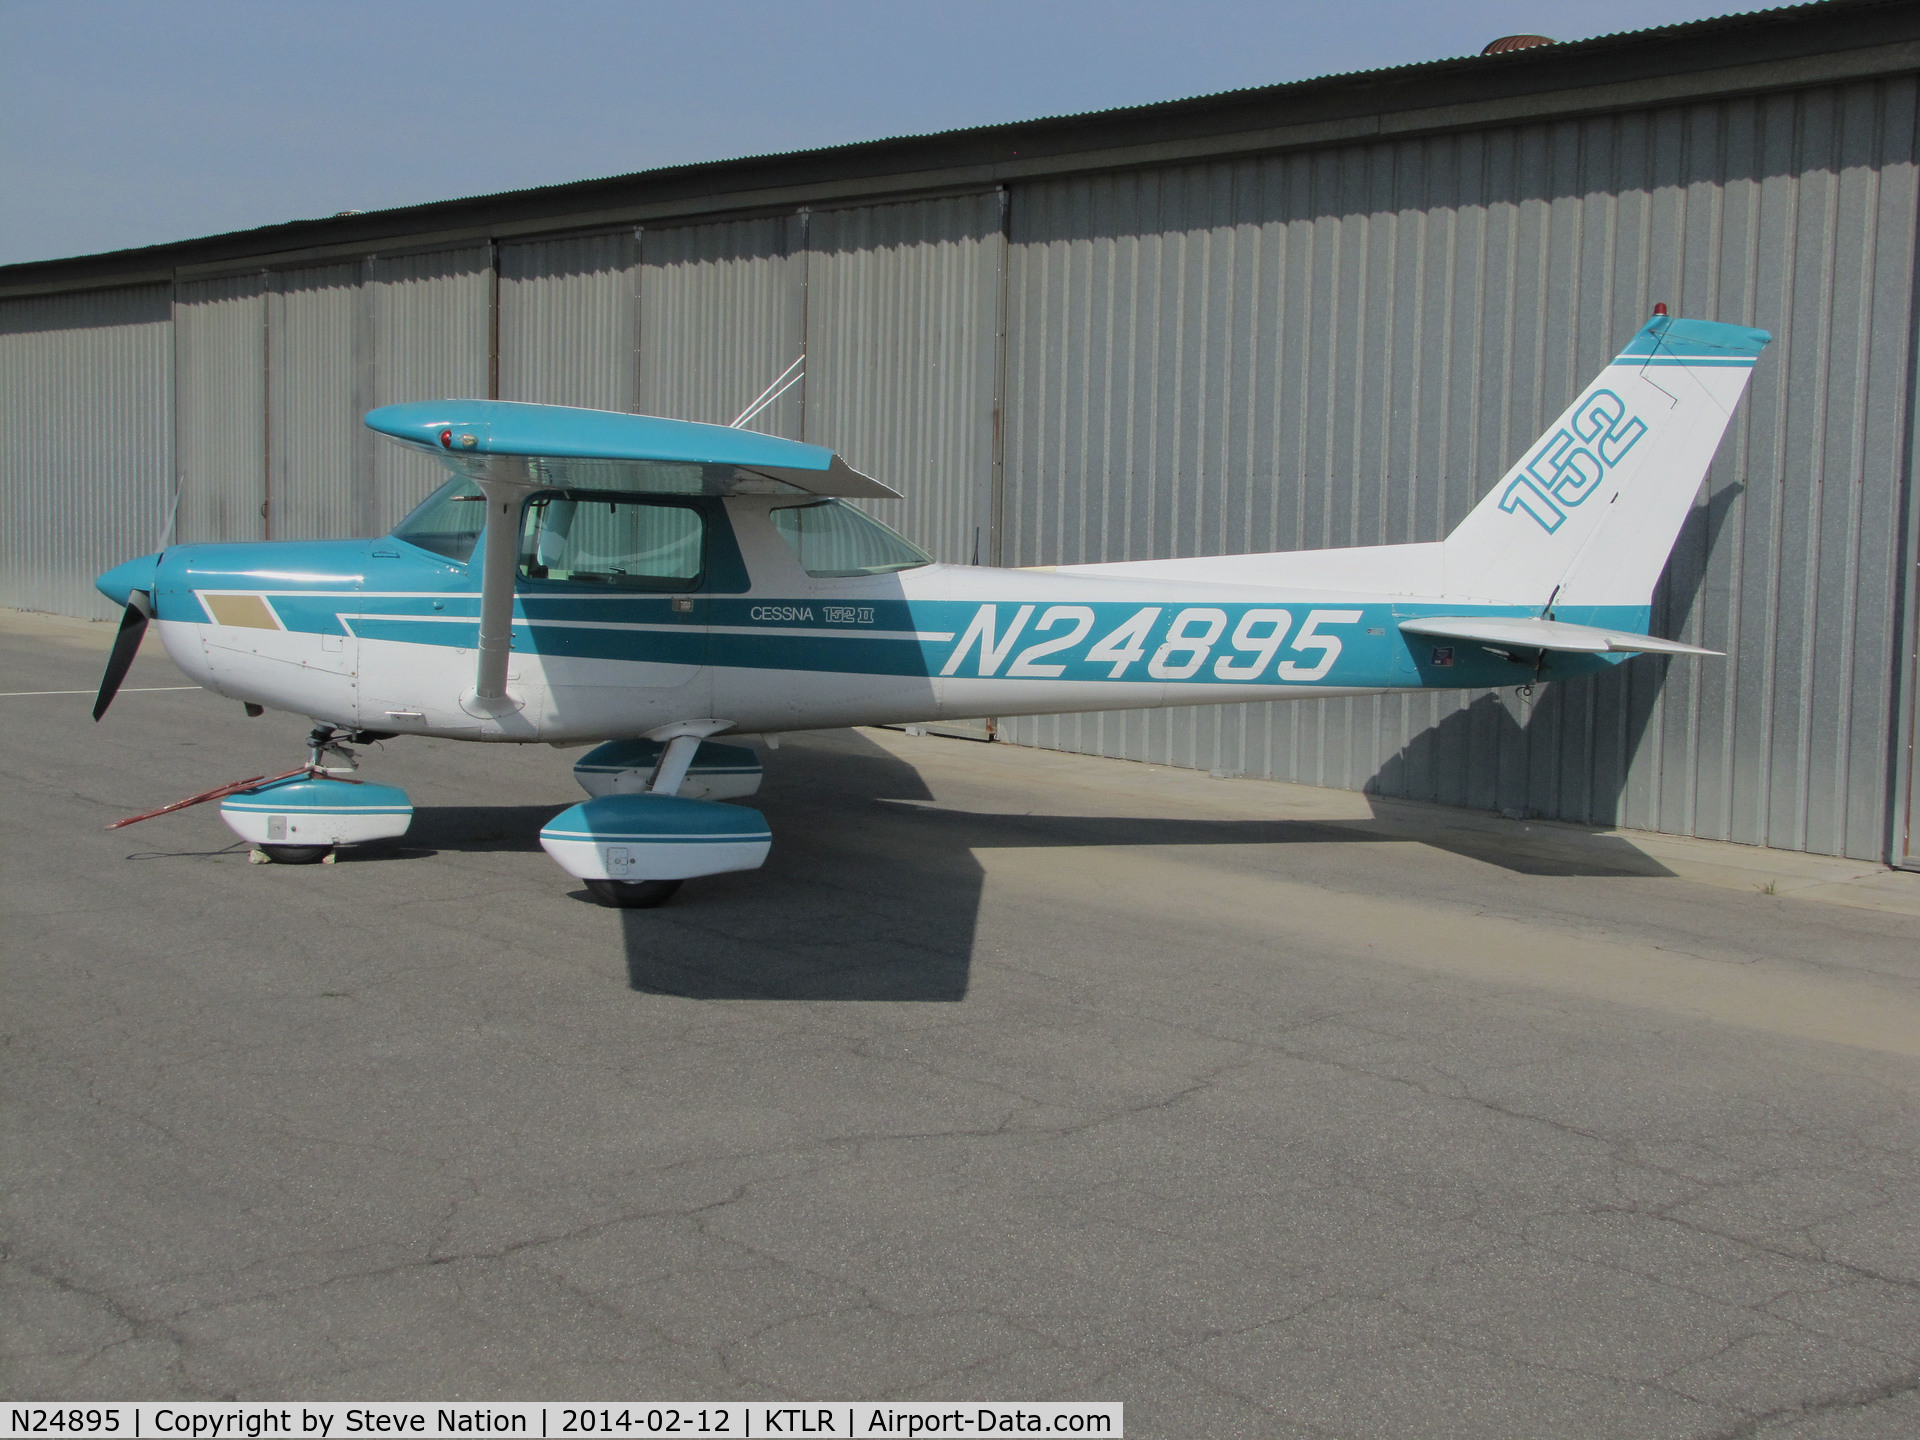 N24895, 1977 Cessna 152 C/N 15280438, SBD Leasing Cessna 152 from Turlock, CA @ Mefford Field (Tulare, CA) for 2014 International Ag Expo